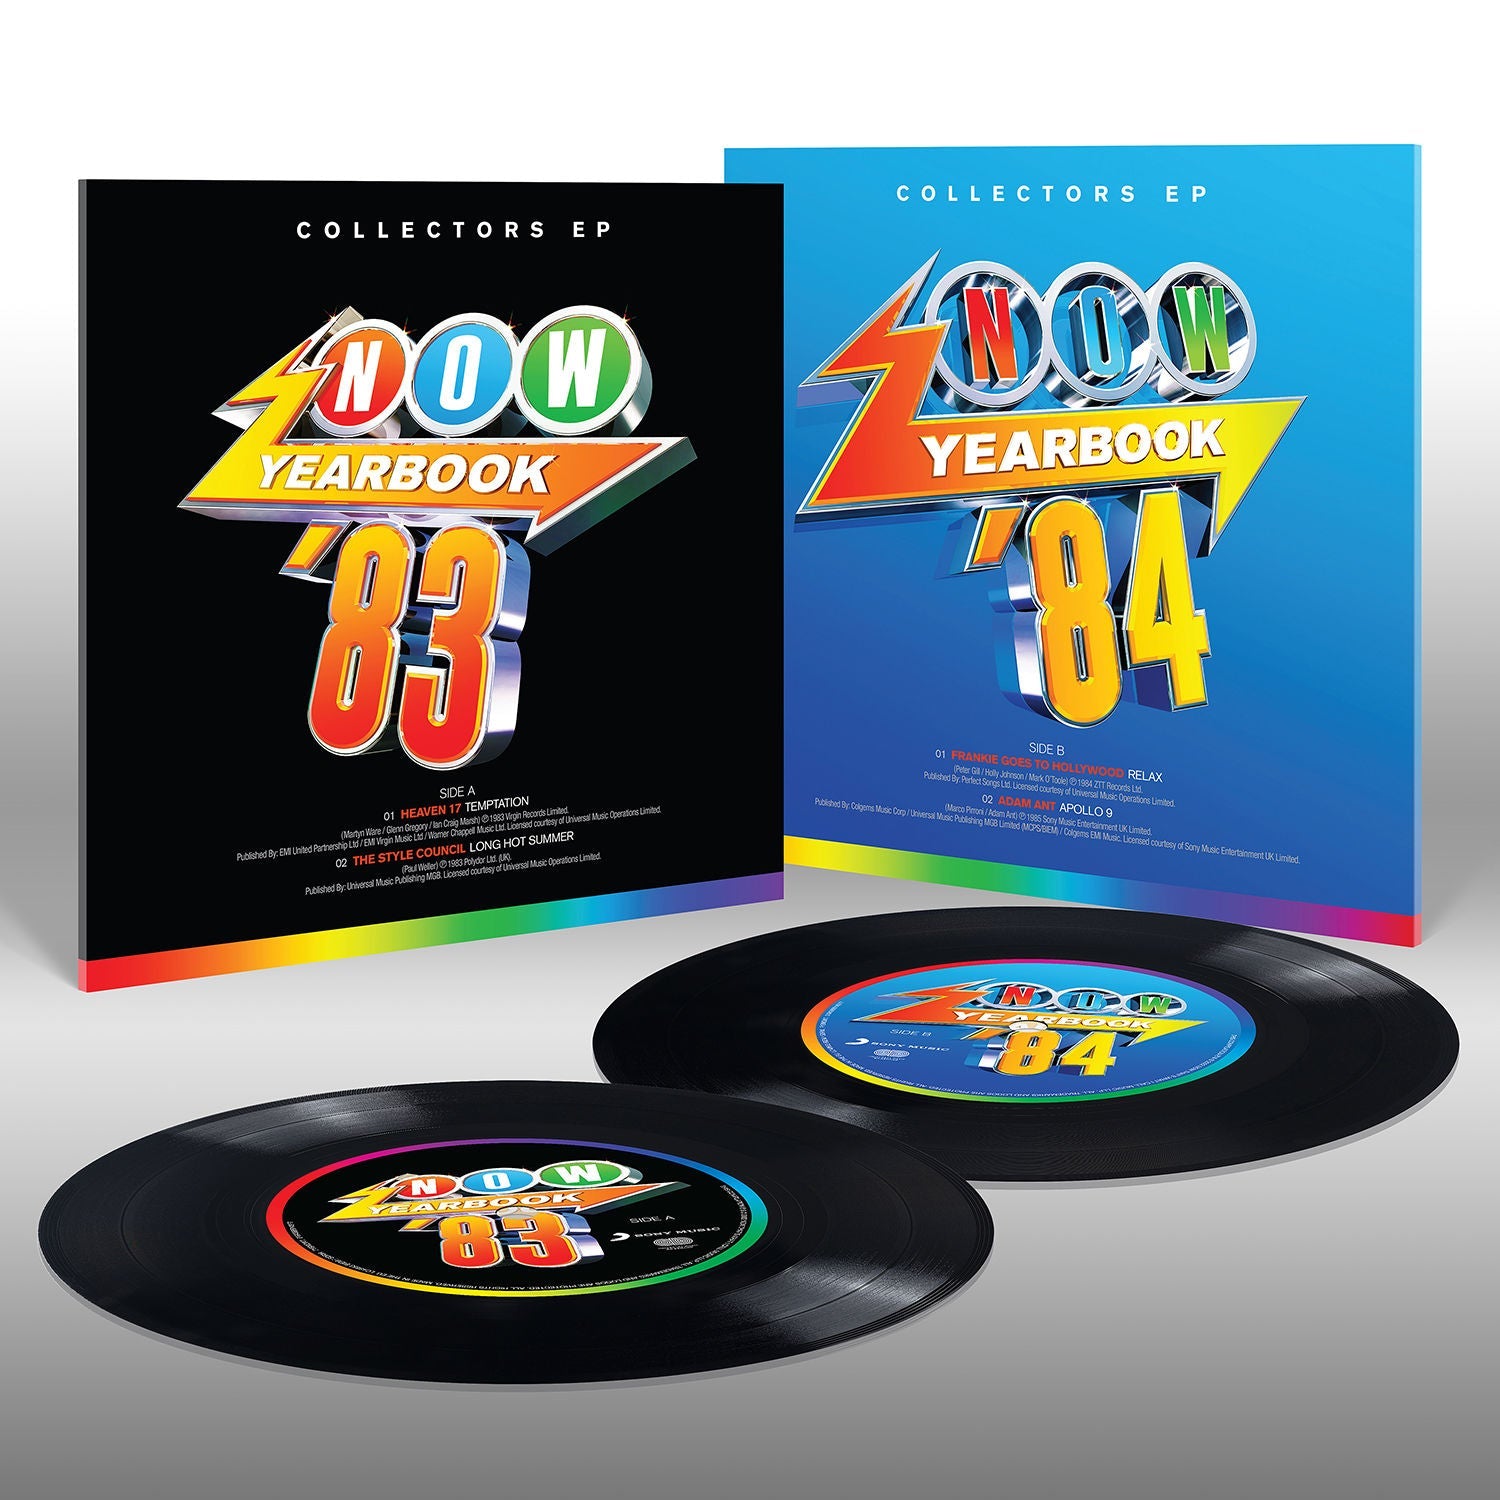 NOW That's What I Call 40 Years: Volume 1 - 1983-1993 (3LP) & NOW Yearbook – Collectors EP 7” Single